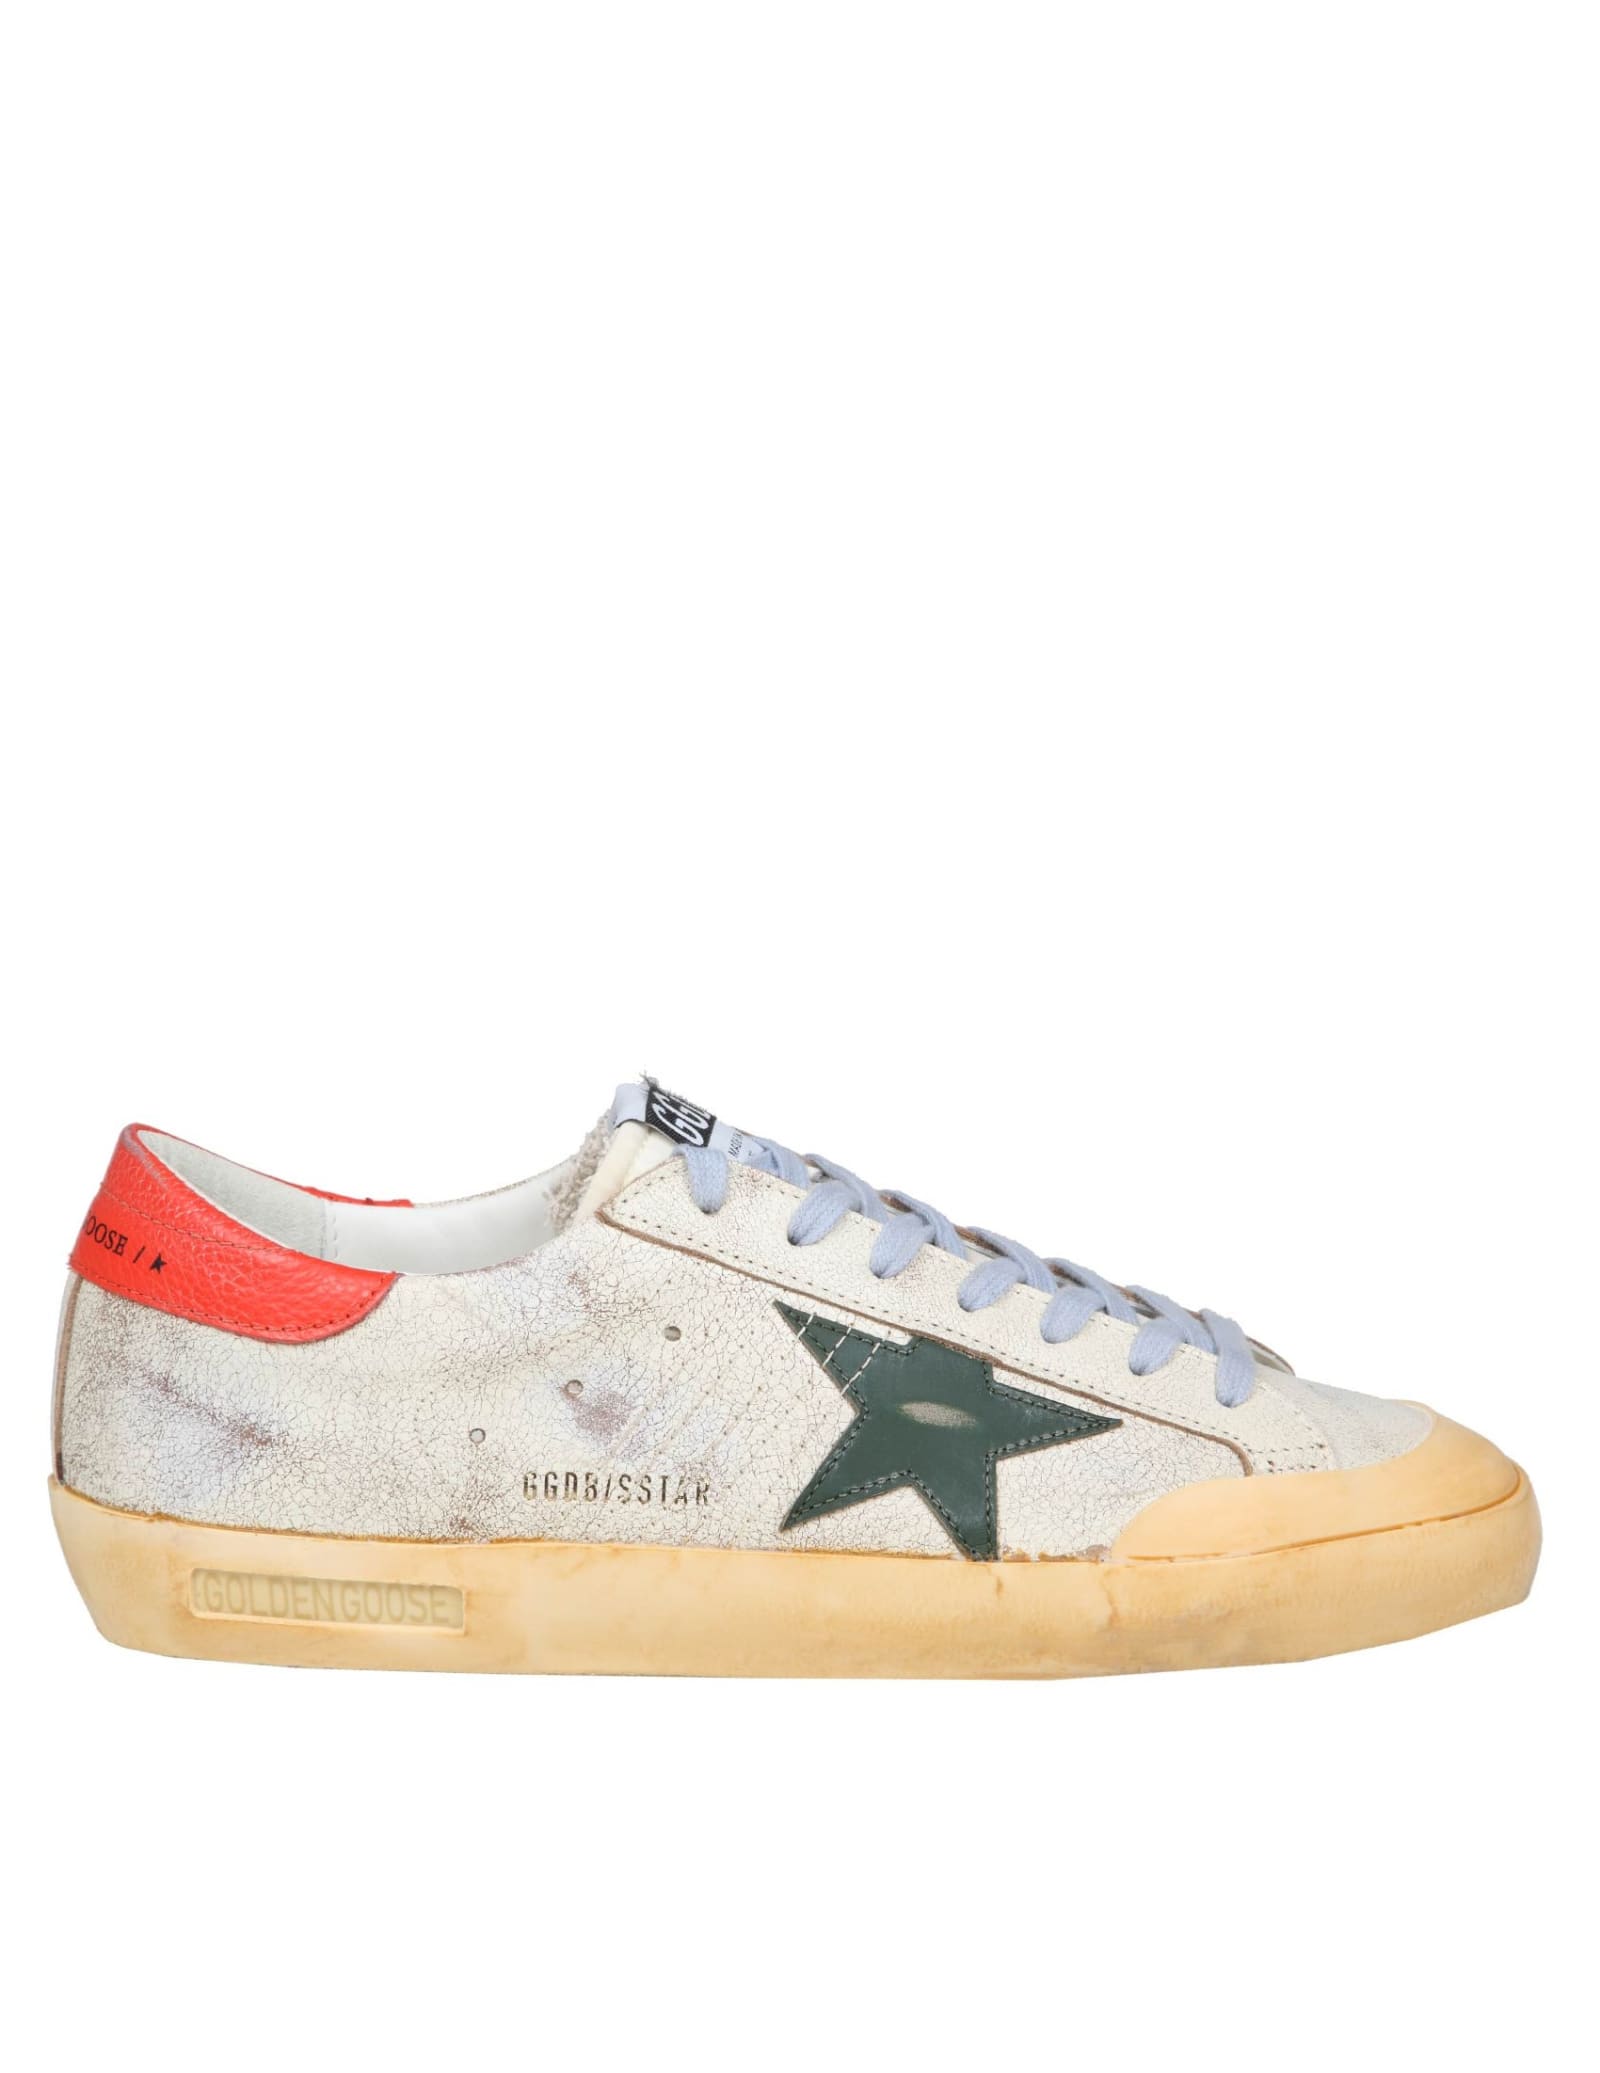 GOLDEN GOOSE GOLDEN GOOSE SUPERSTAR IN WHITE AND GREEN LEATHER